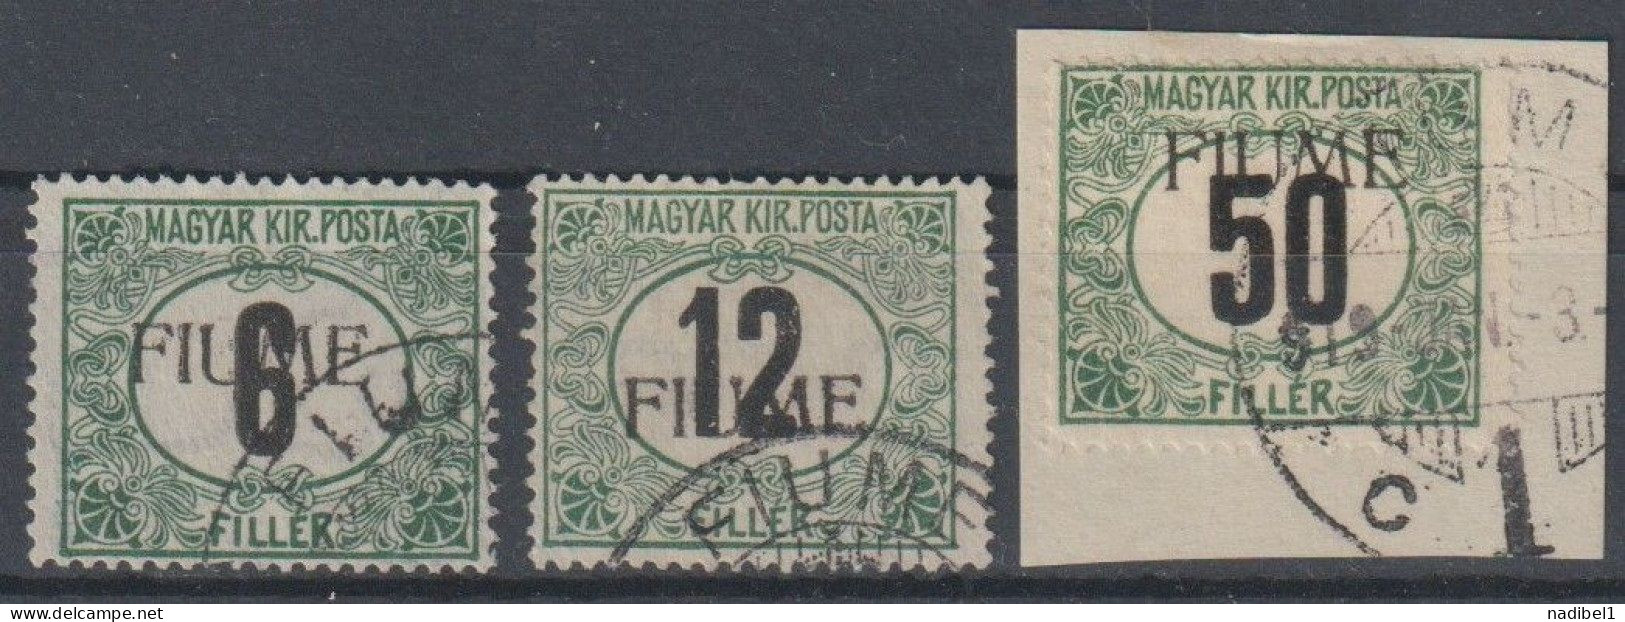 Fiume, 1918, Postage Due, "Black Numerals", Machine Overprint, Cancelled, Complete Set, Certificate Martinaš - Fiume